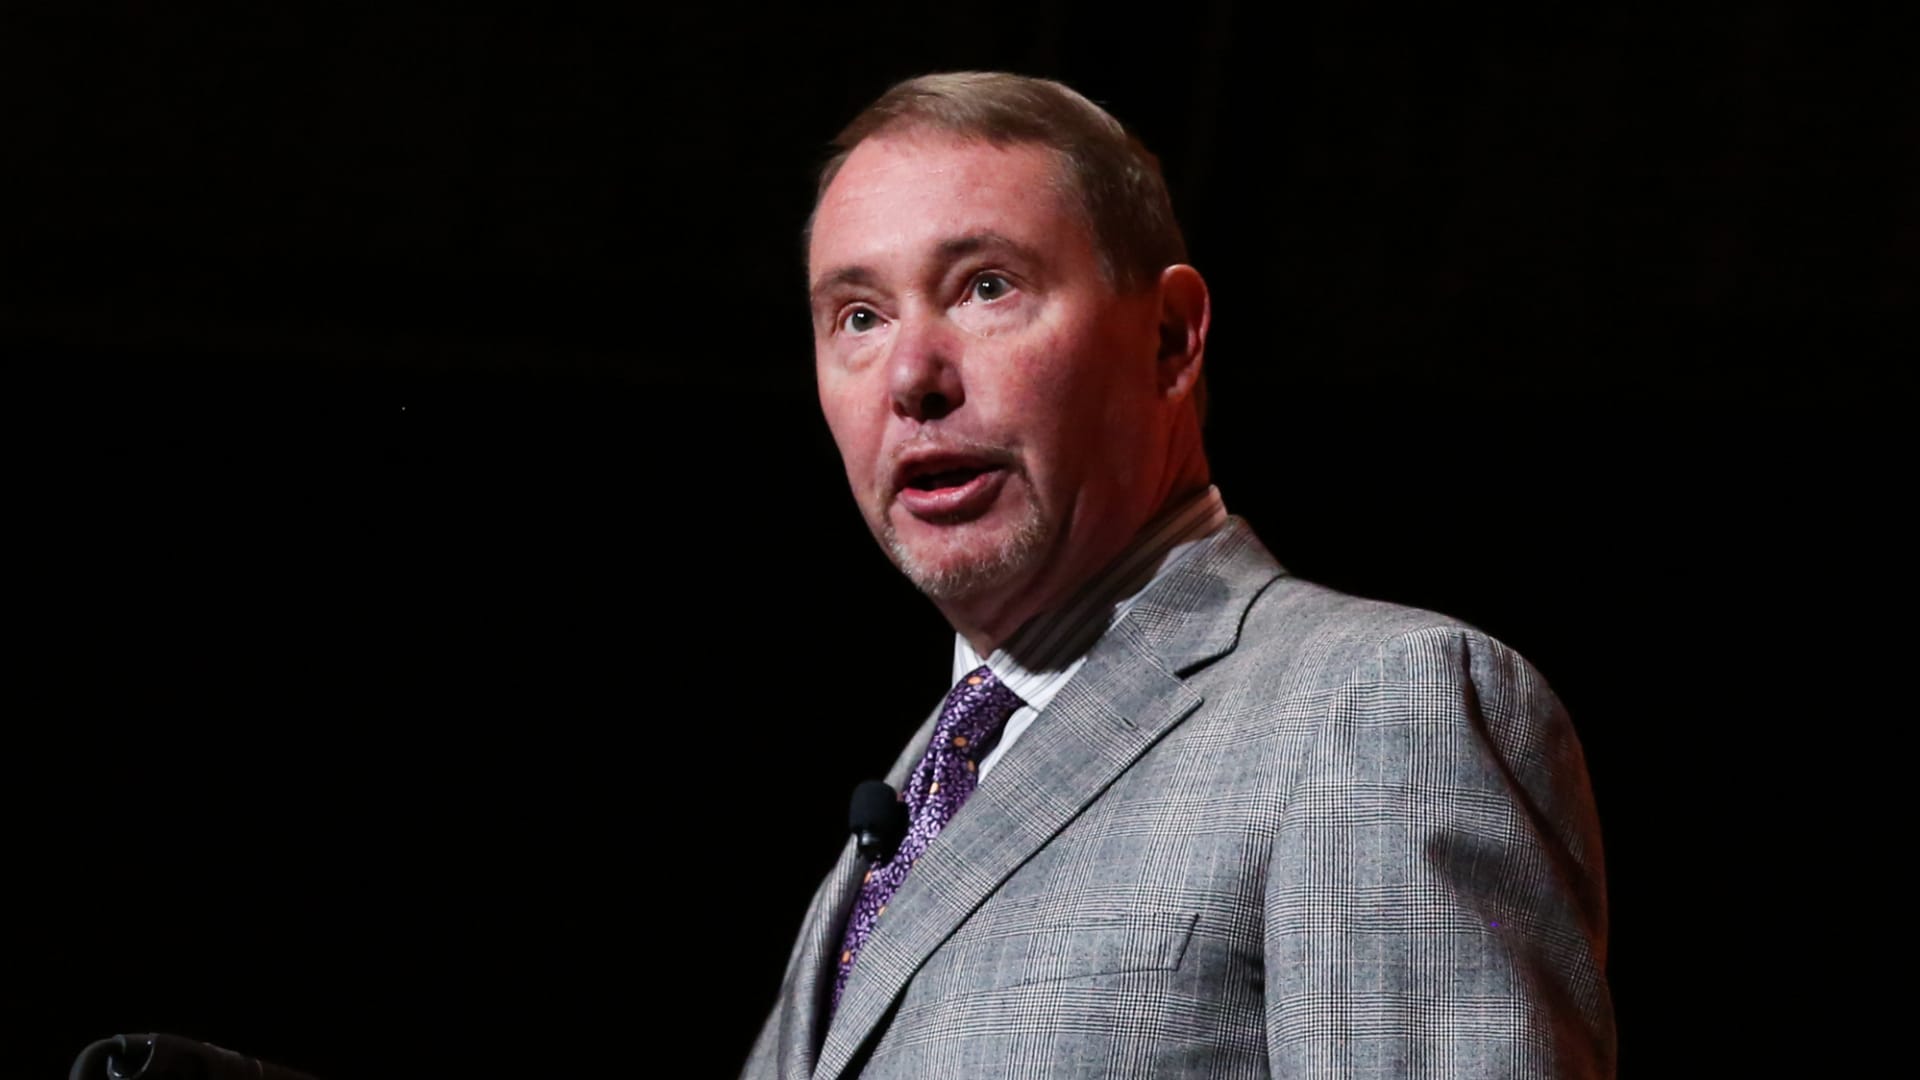 Jeffrey Gundlach speaking at the 2019 Sohn Conference in New York on May 6, 2019.